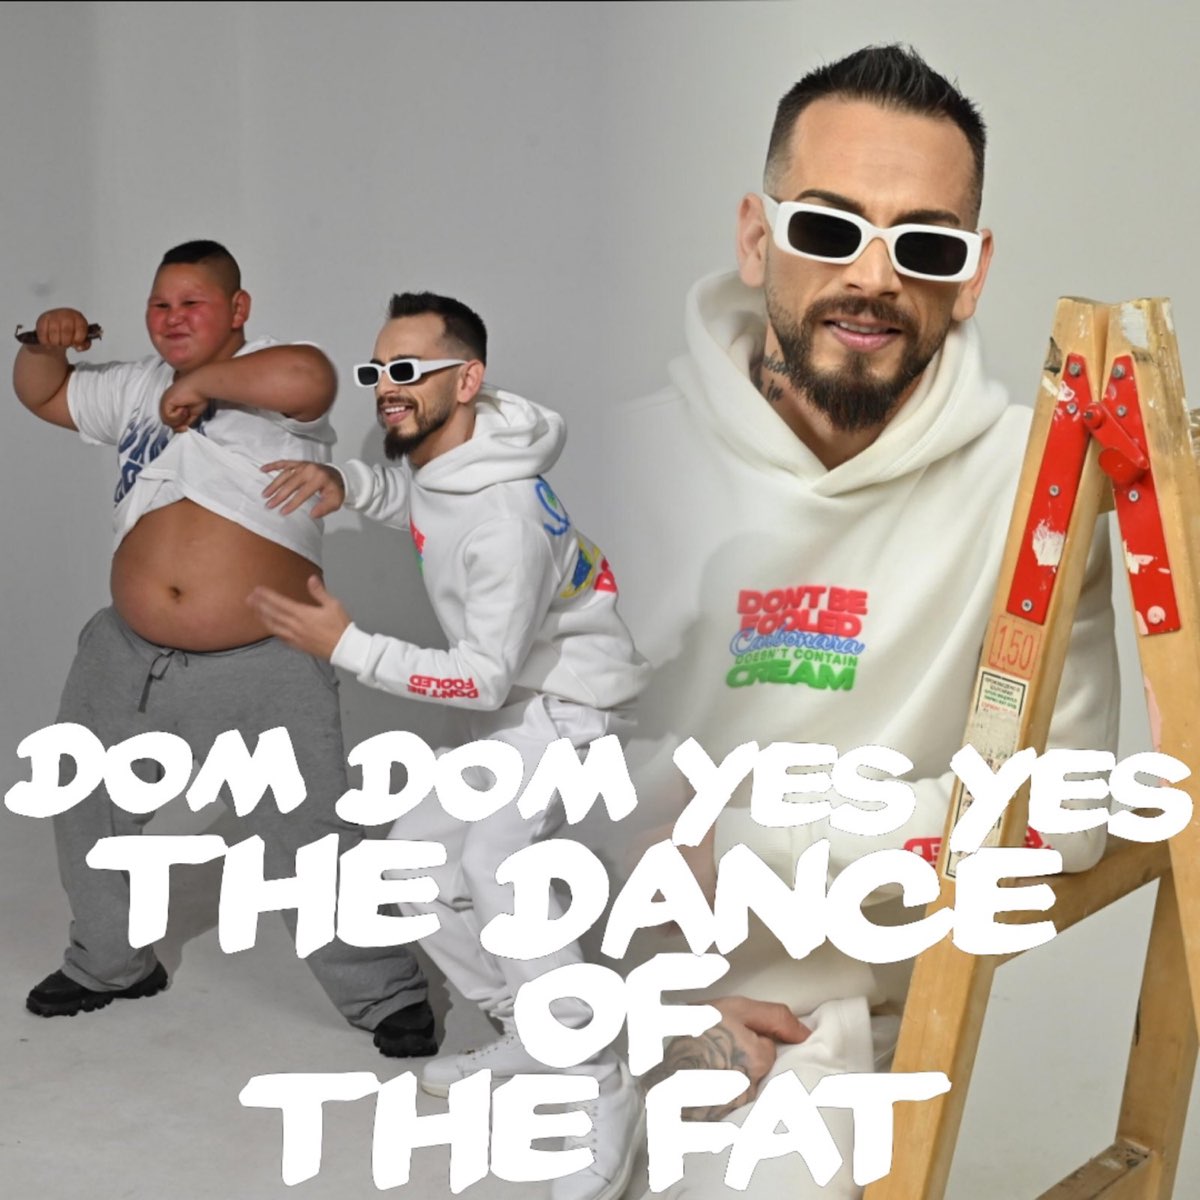 Which version of this song is the best one? Biser King “Dom Dom